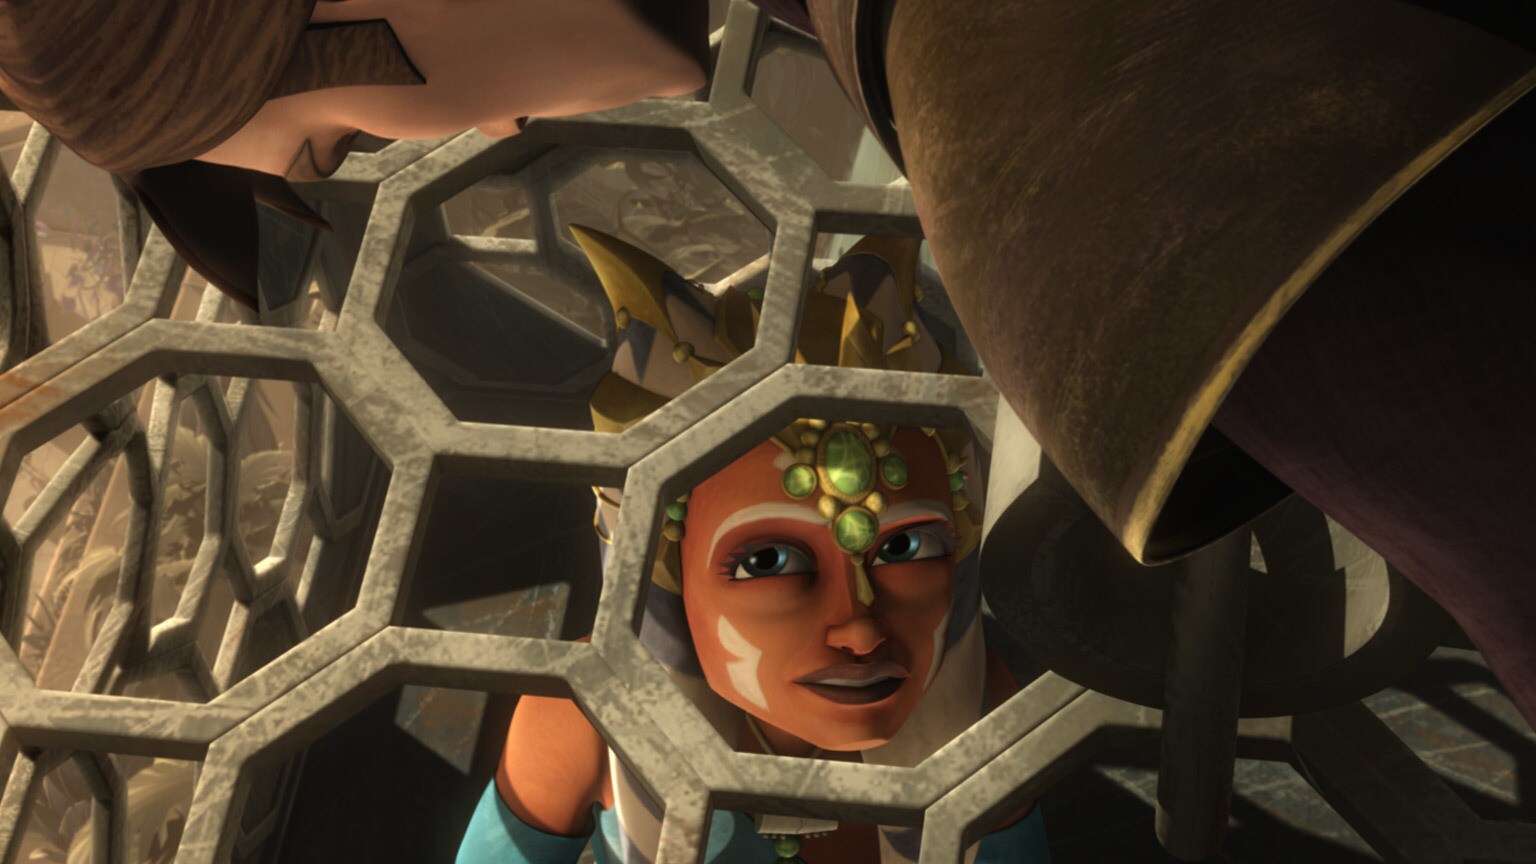 The Clone Wars Rewatch: Plotting an "Escape from Kadavo"